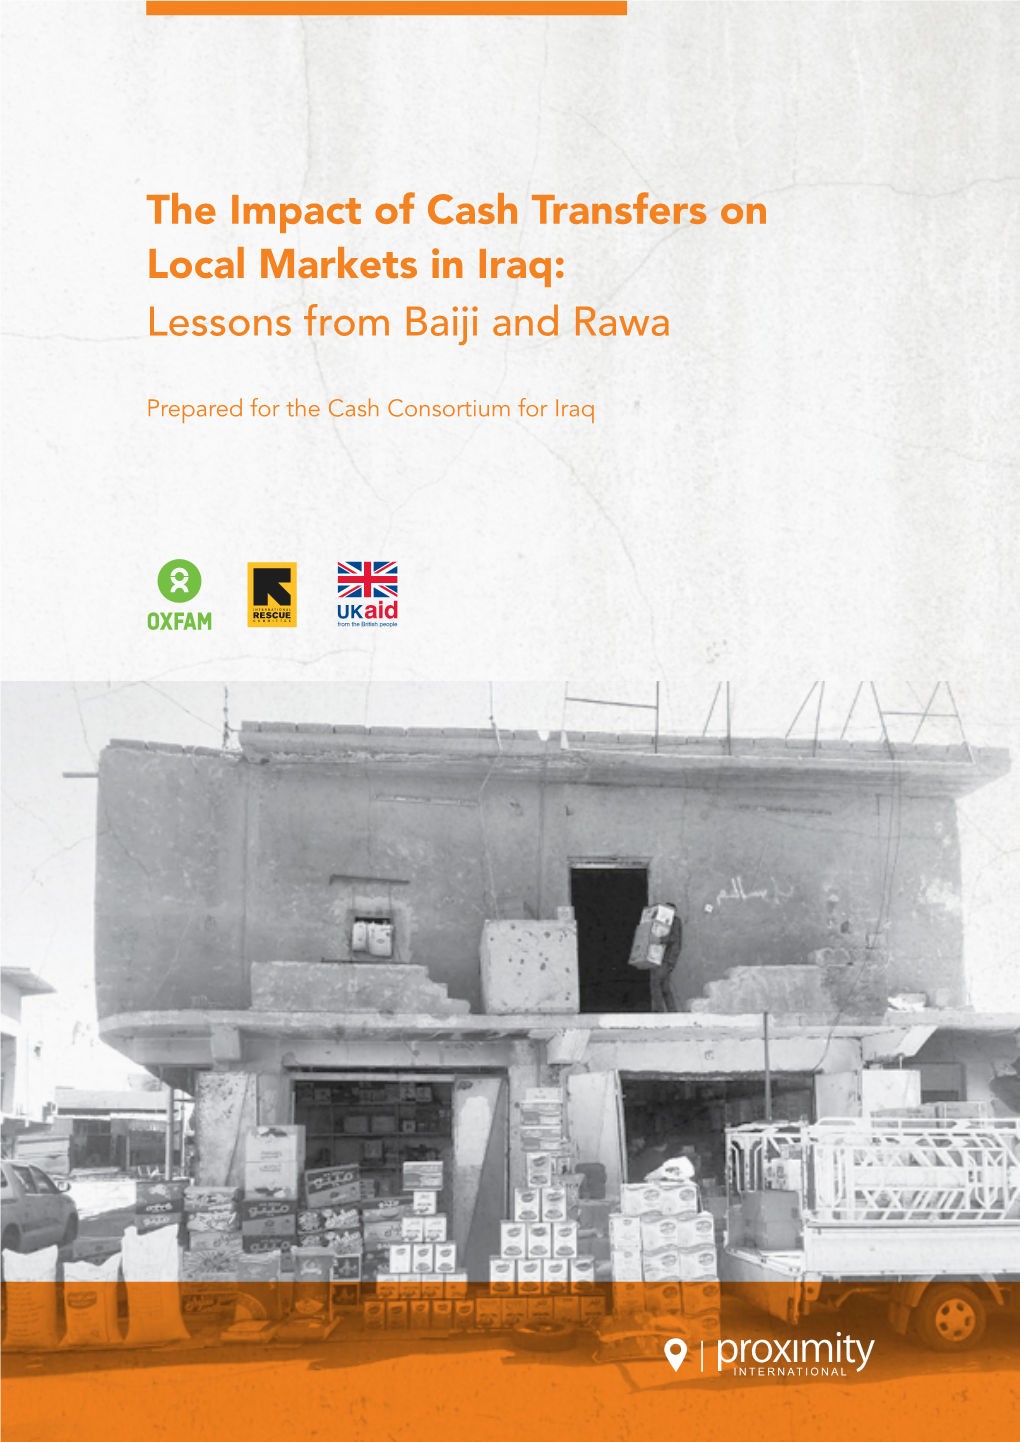 The Impact of Cash Transfers on Local Markets in Iraq: Lessons from Baiji and Rawa